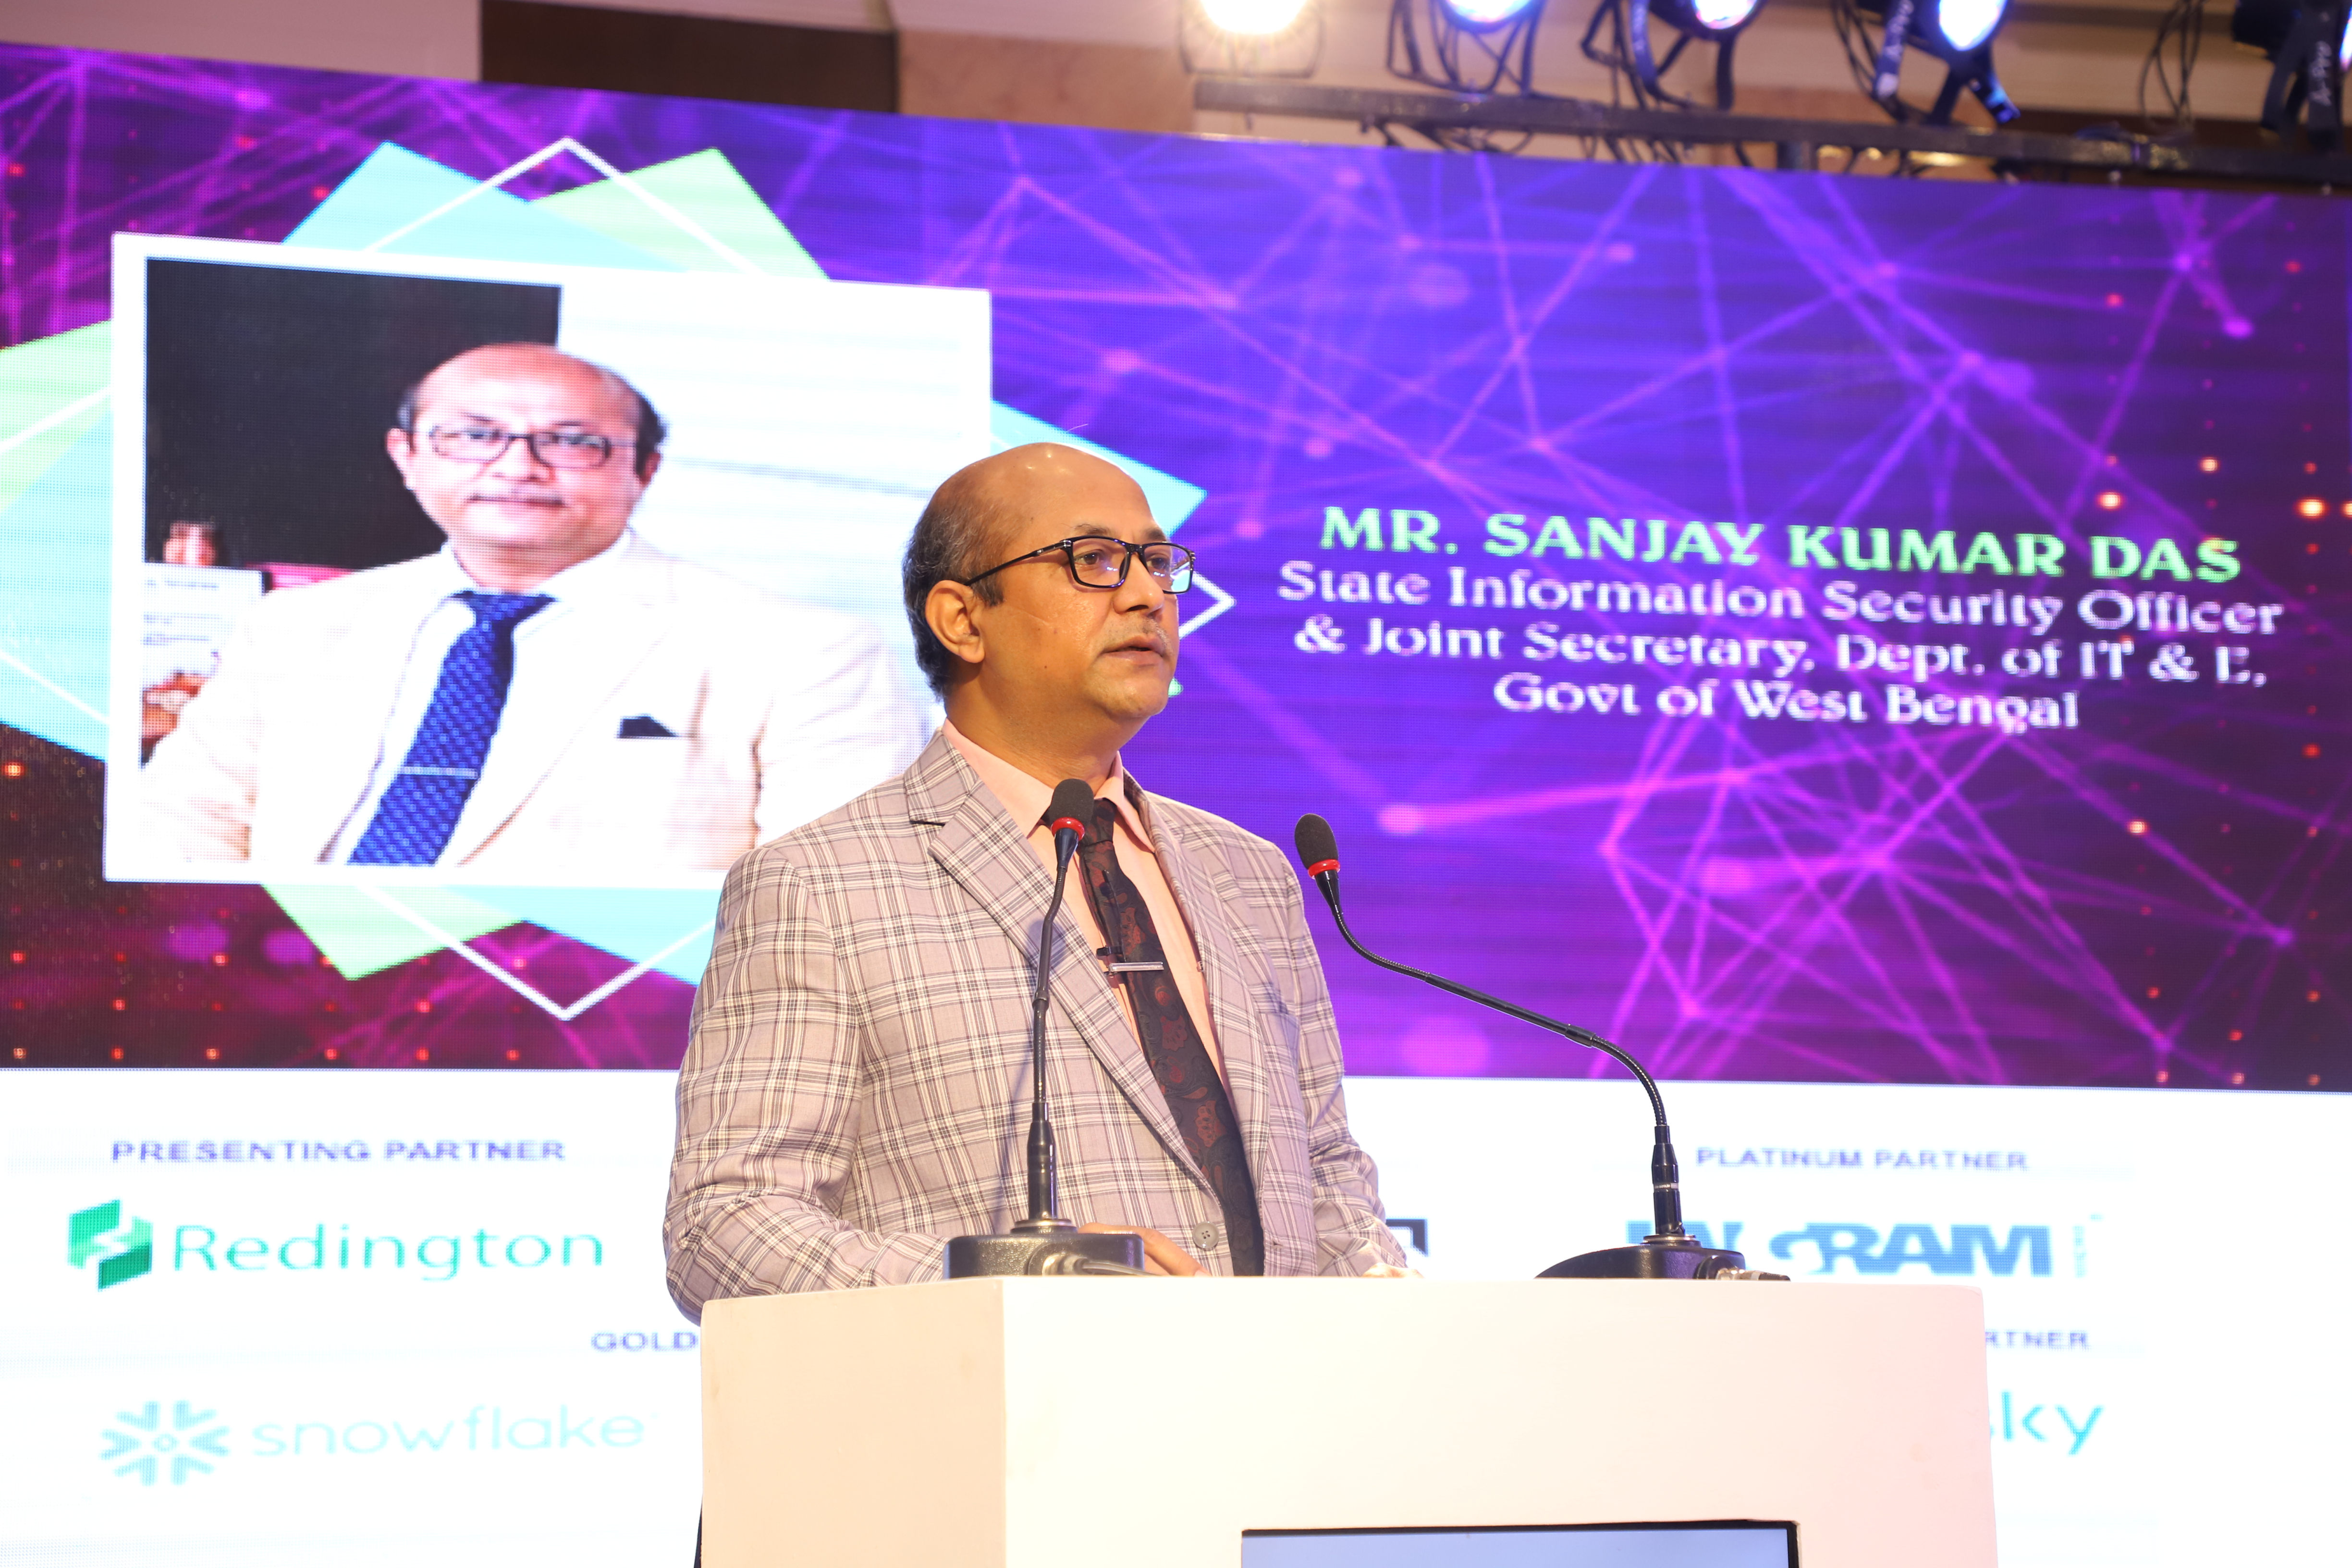 Presentation by Sanjay Kumar Das, State Information Security Officer & Joint Secretary, Dept. of IT & E, Govt of West Bengal